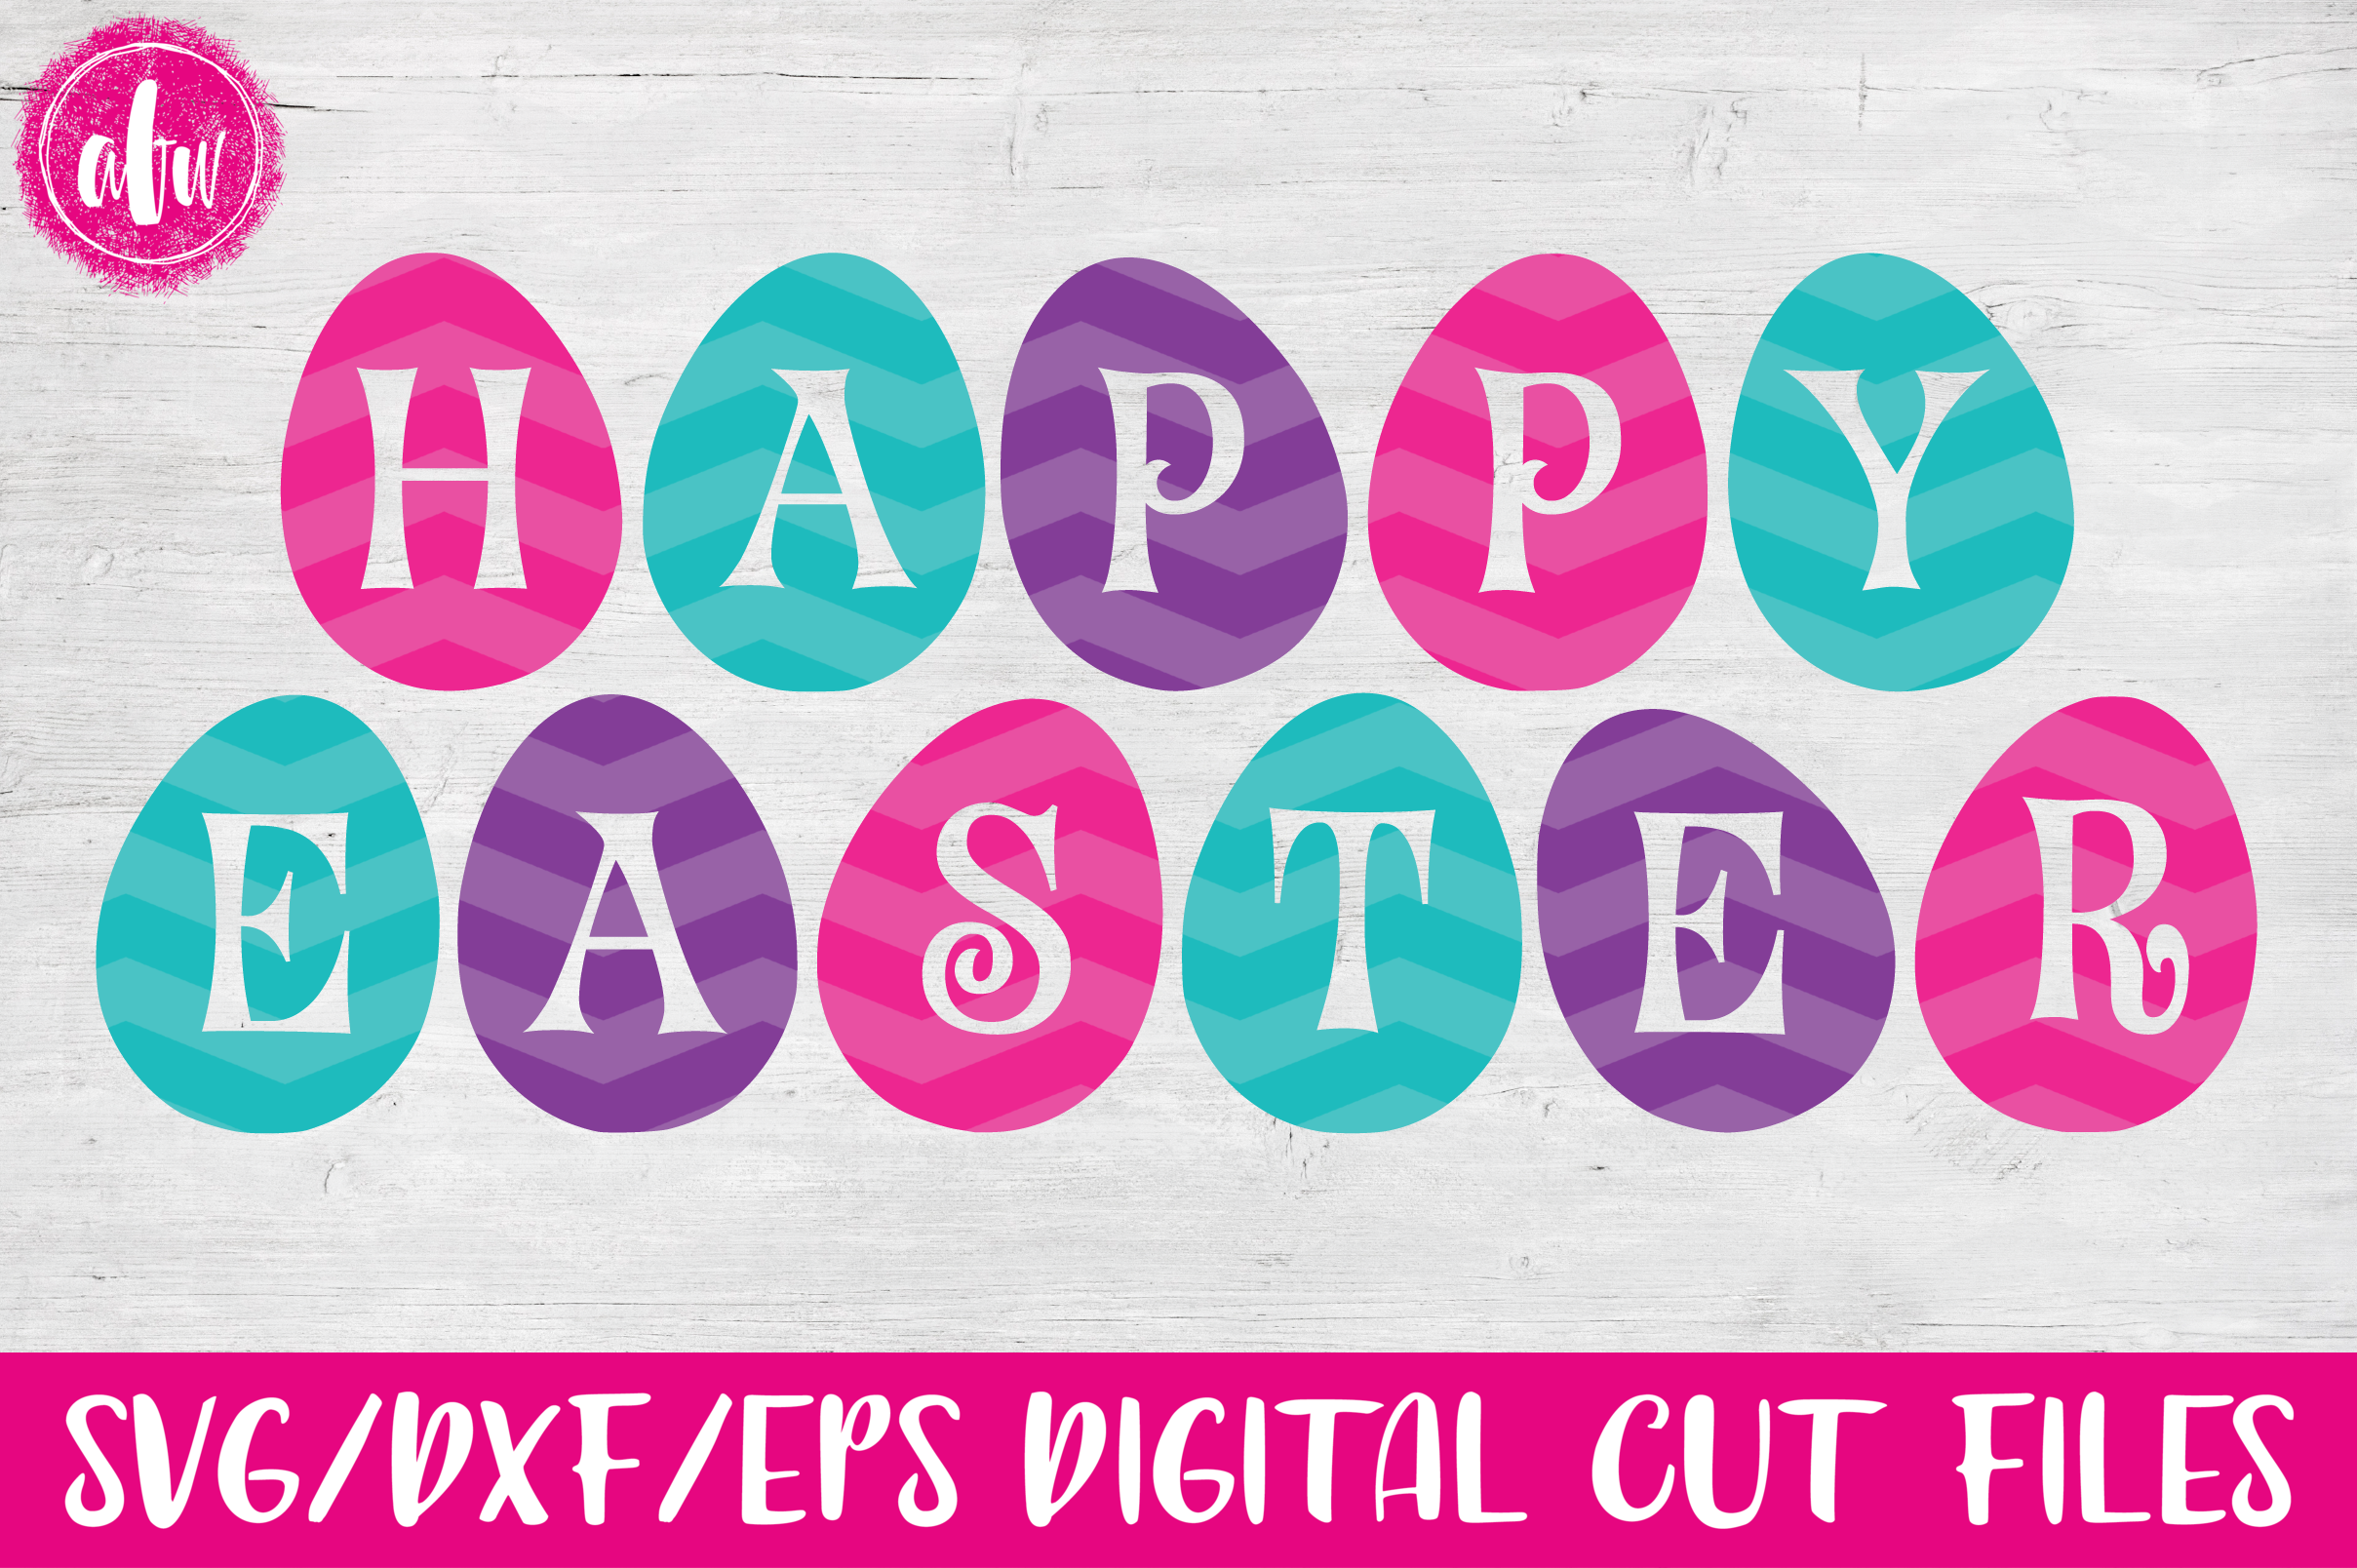 Happy Easter Eggs - SVG, DXF, EPS Cut Files